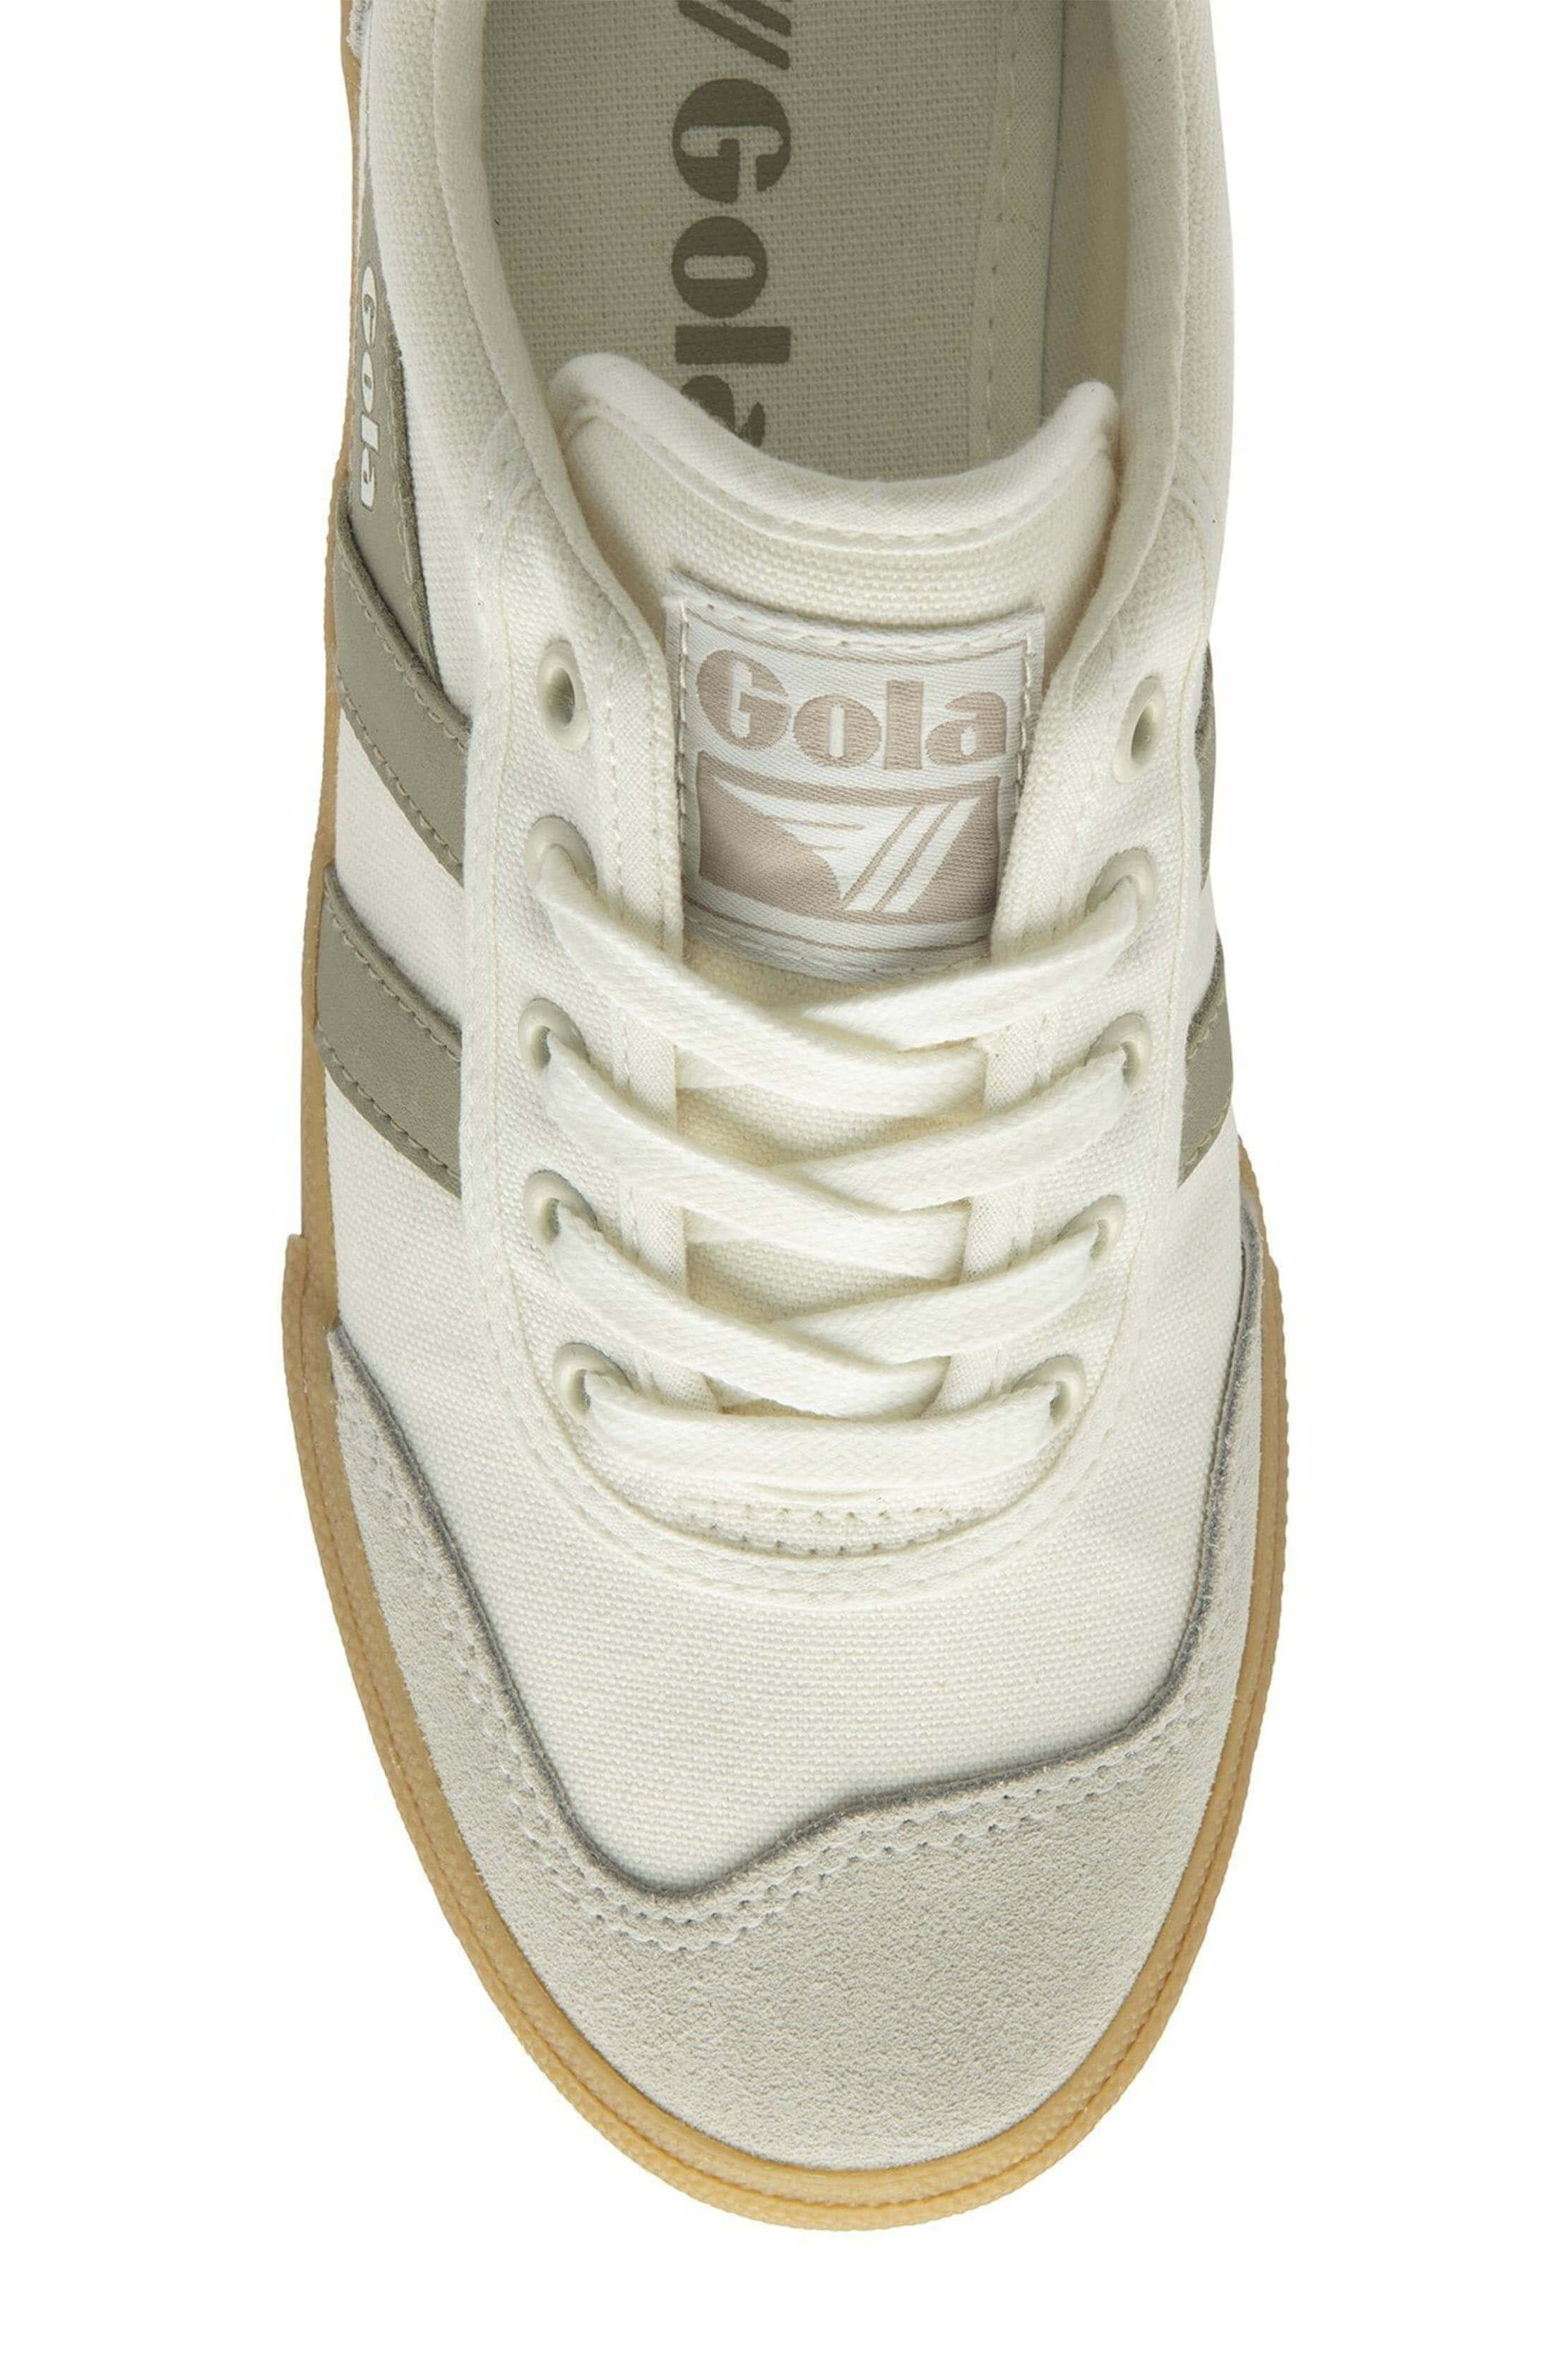 Gola Badminton sneakers in off white and grey